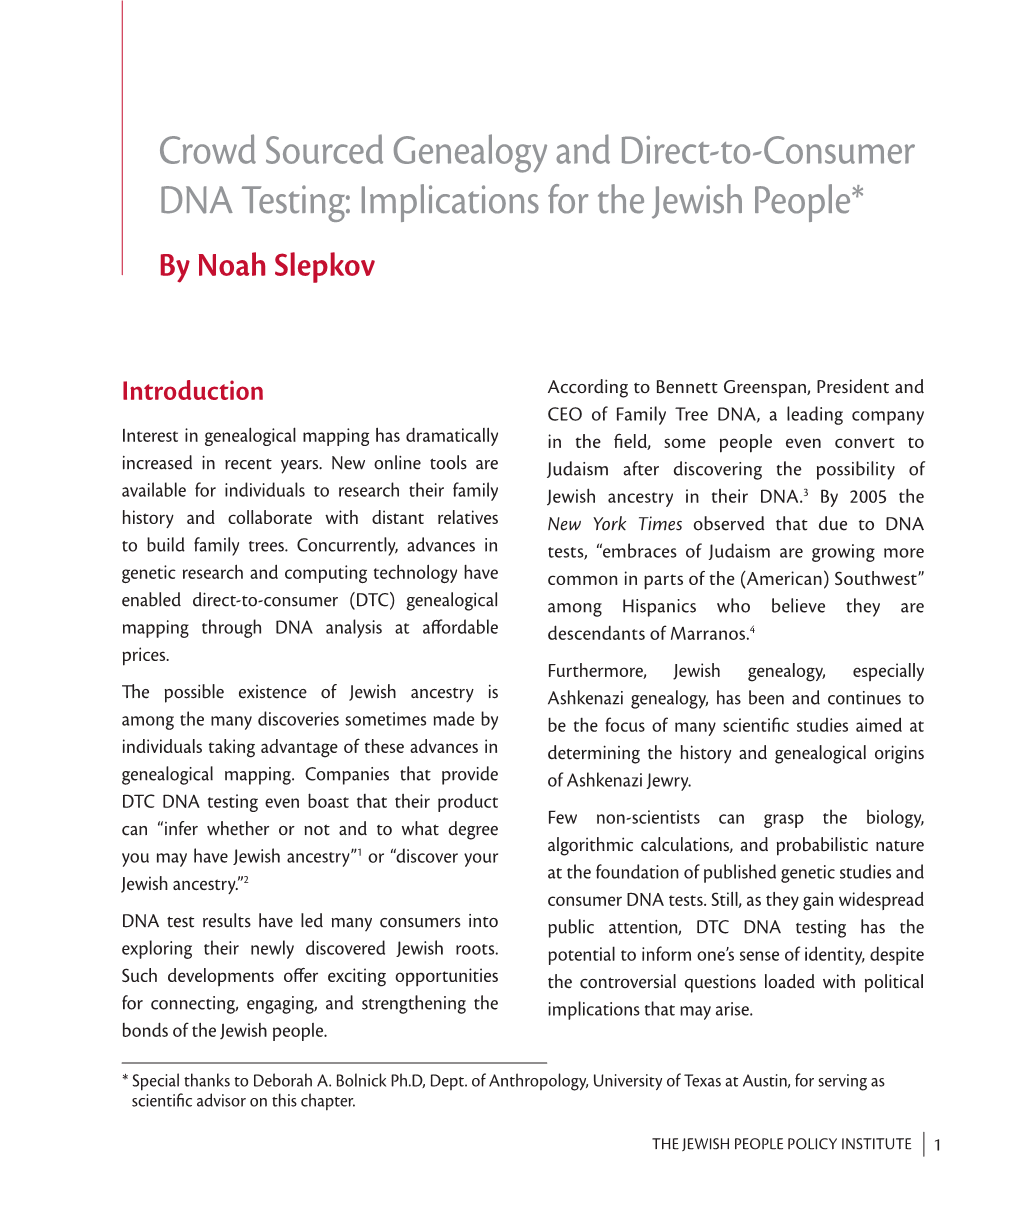 Crowd Sourced Genealogy and Direct-To-Consumer DNA Testing: Implications for the Jewish People* by Noah Slepkov